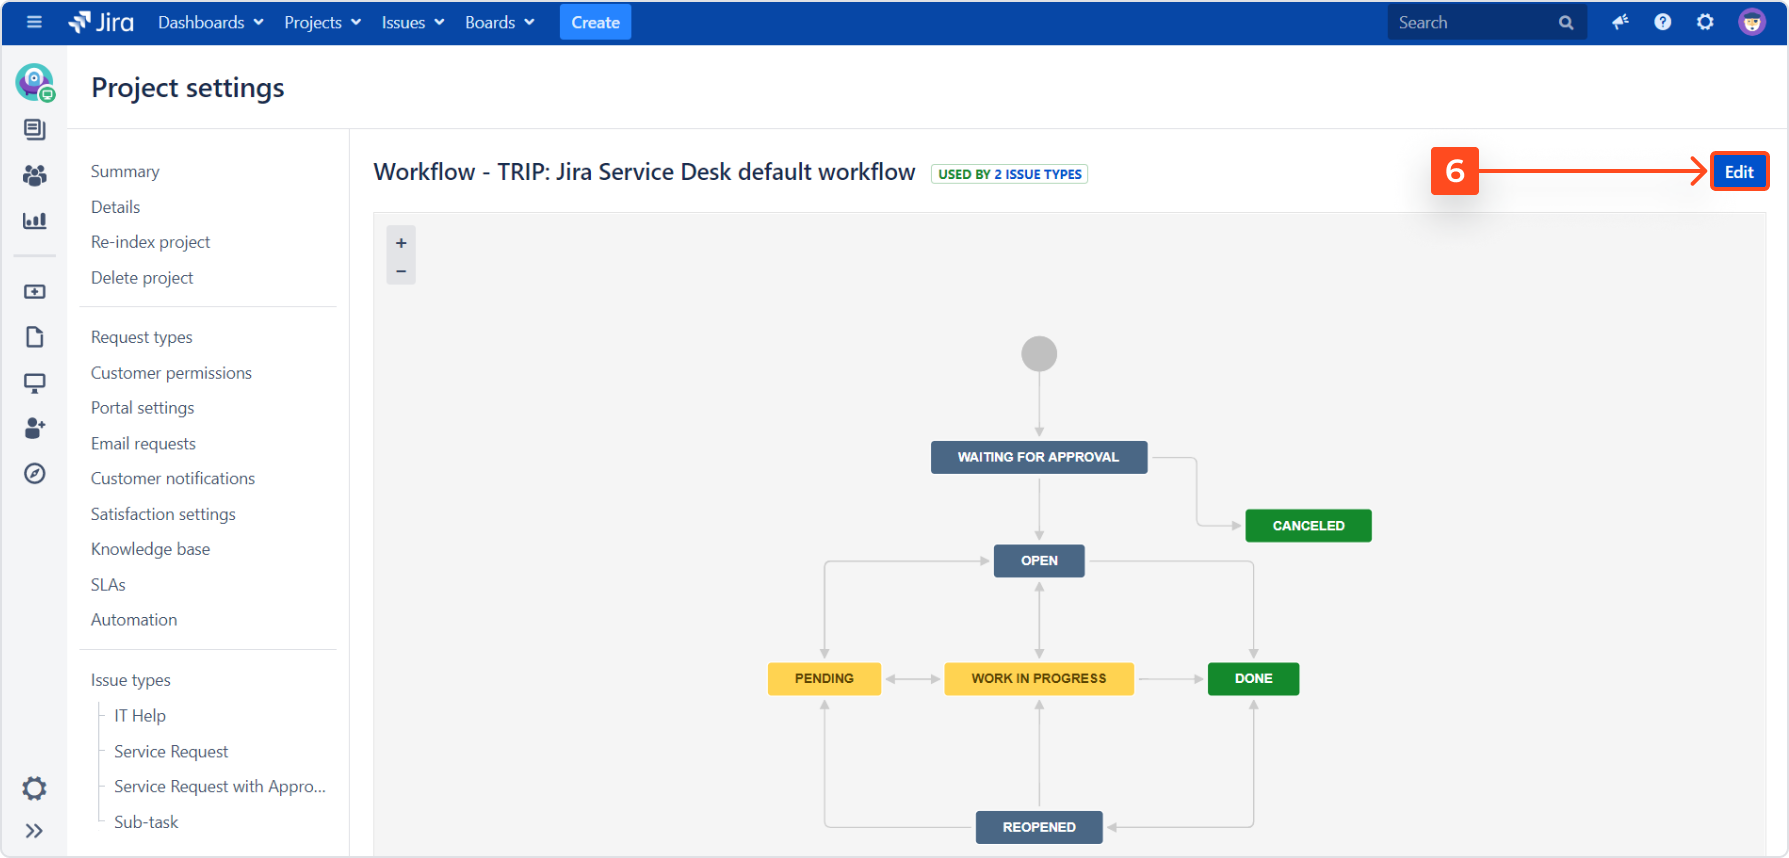 Go to Edit in the top right corner with Actions for Jira Service Management features